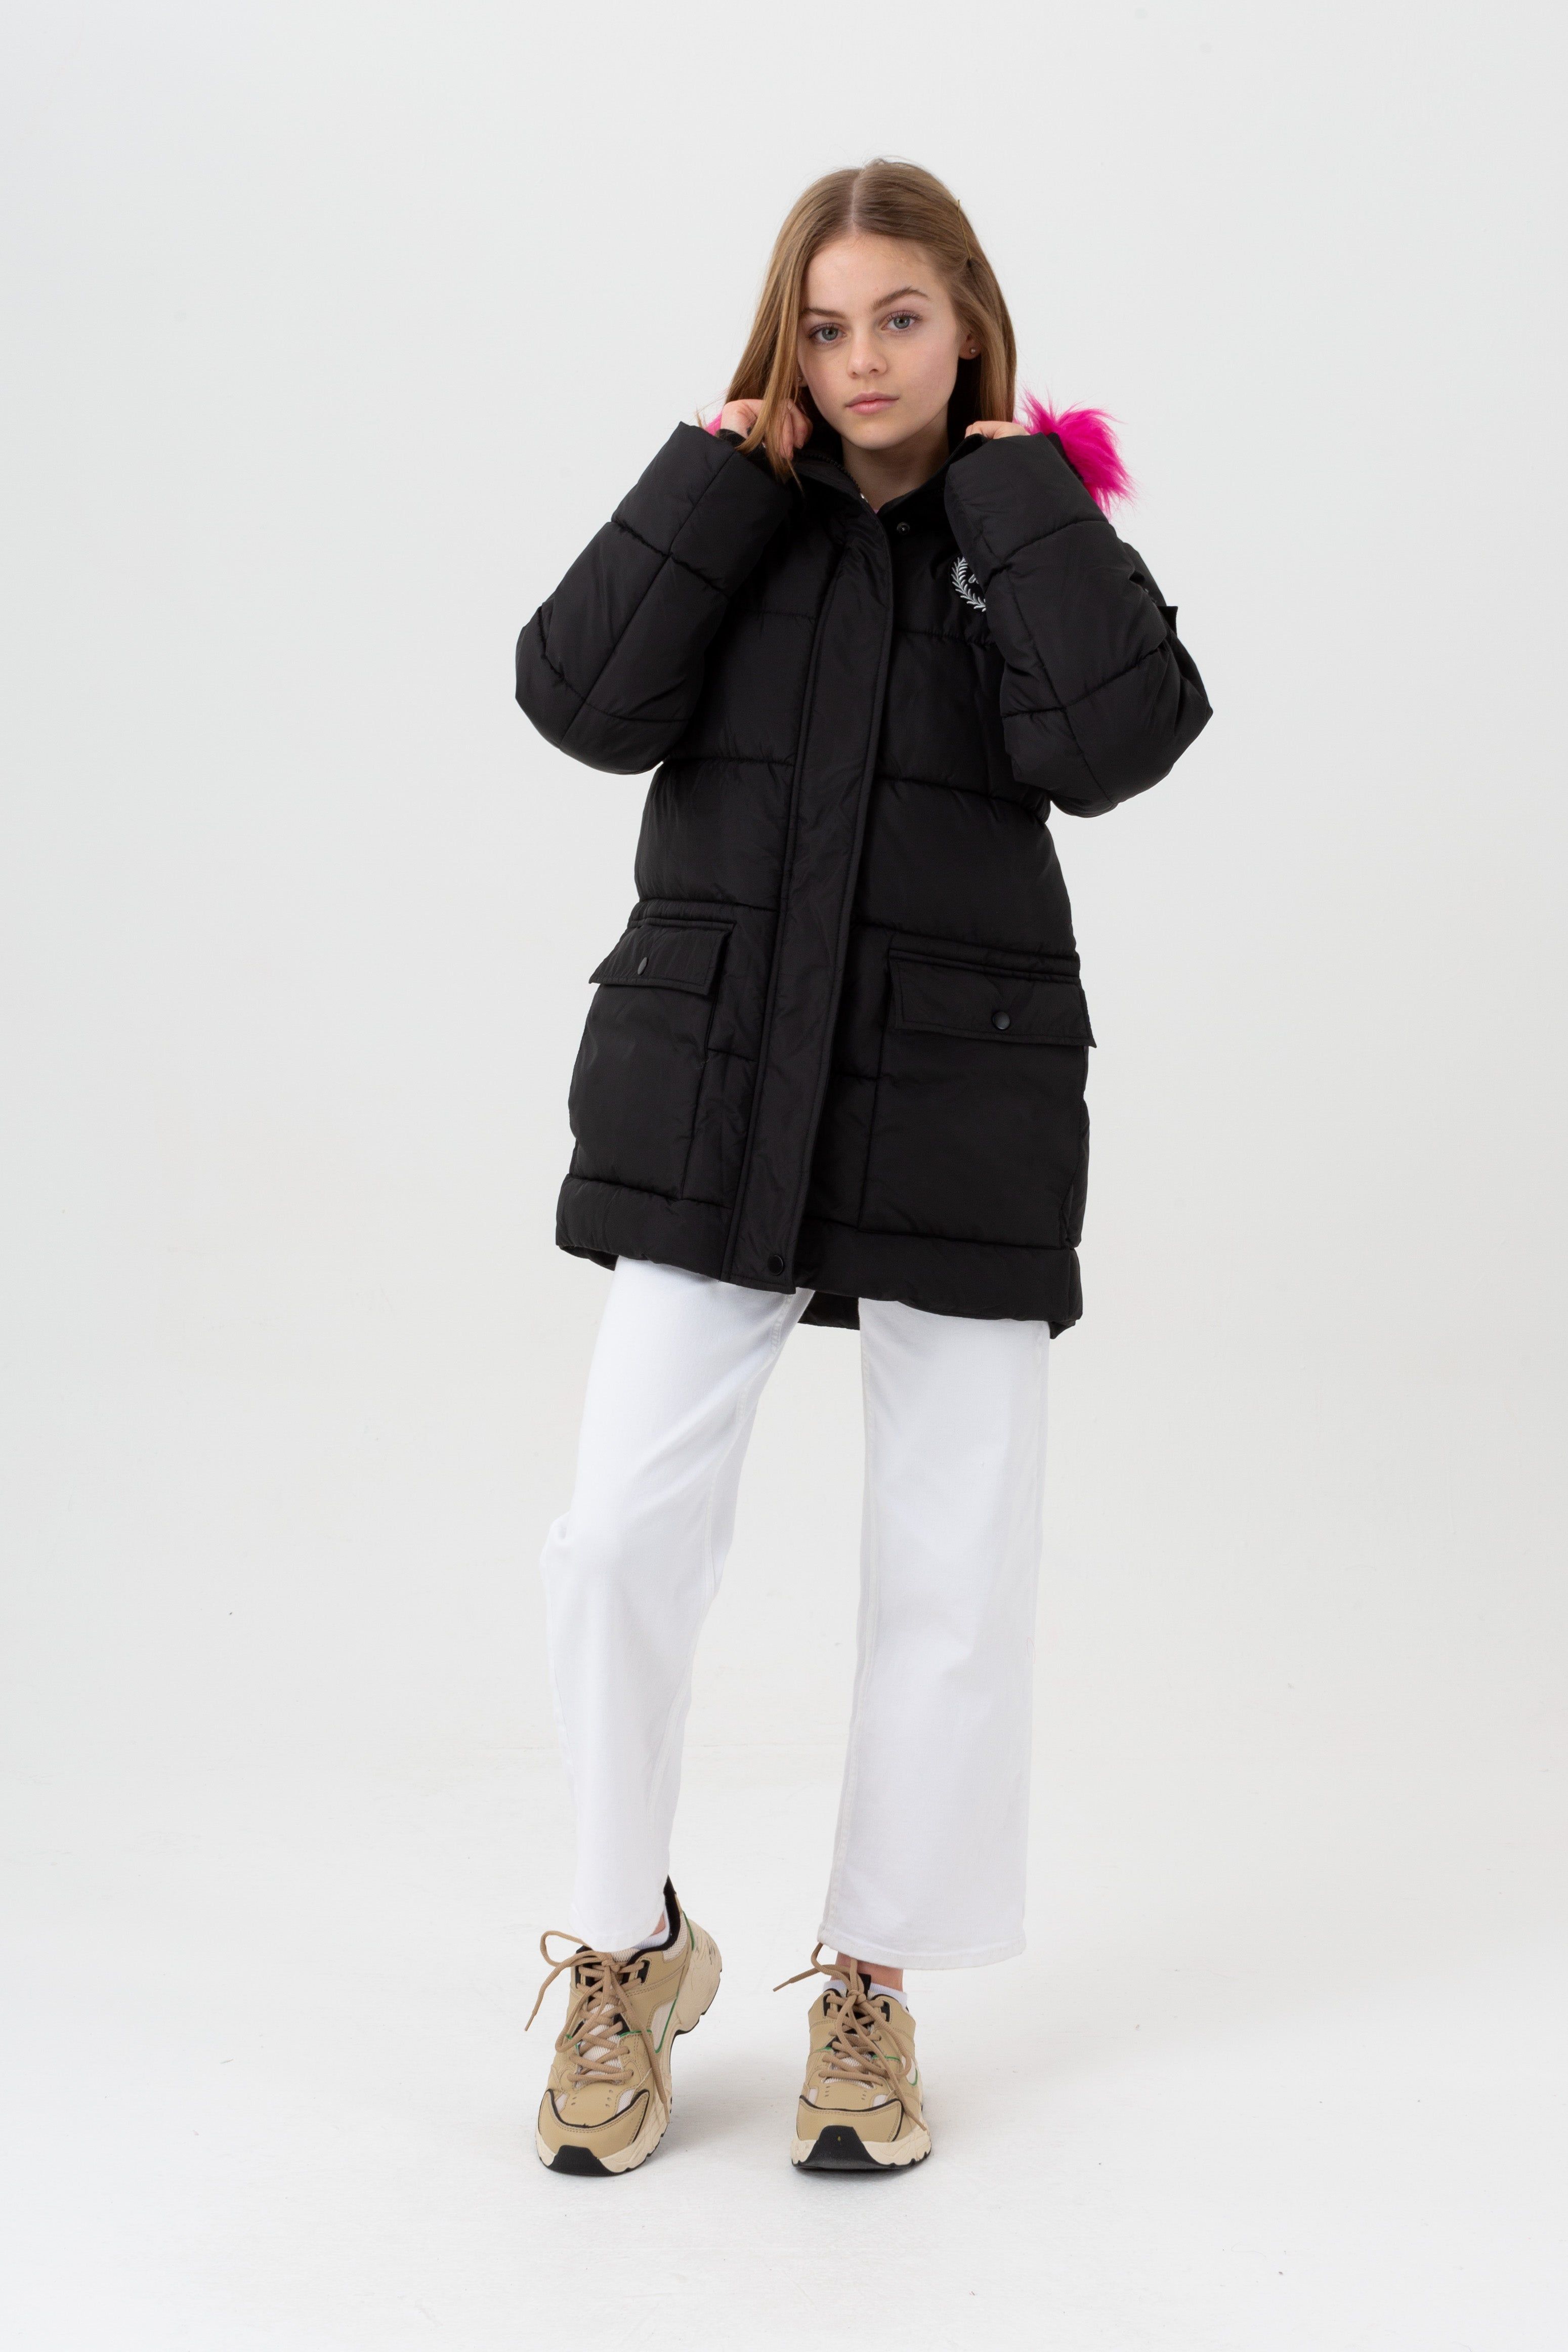 Meet the HYPE. Girls Black Bloom Crest Explorer Jacket, perfect for braving the cold weather this season. Designed in our quilted explorer jacket shape, boasting a pink faux fur hood and embroidered HYPE. Crest. Wear with jeans and a t-shirt or a HYPE. hoodie and matching joggers for the ultimate comfortable fit.